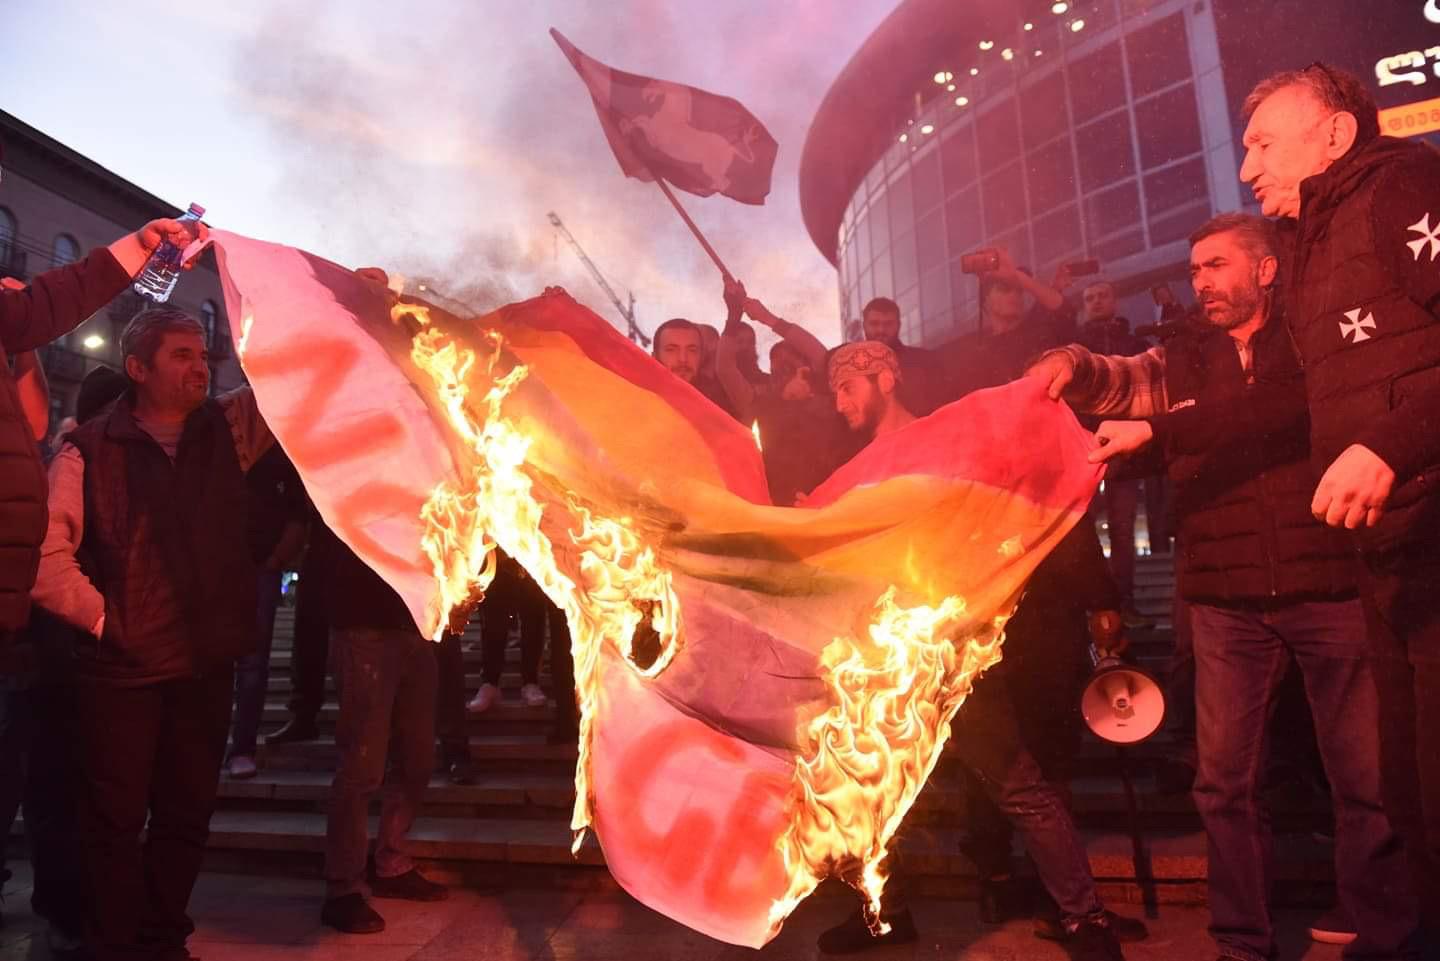 Demonstrators in Tbilisi burn an LGBT flag before the screening of the film And Then We Danced.